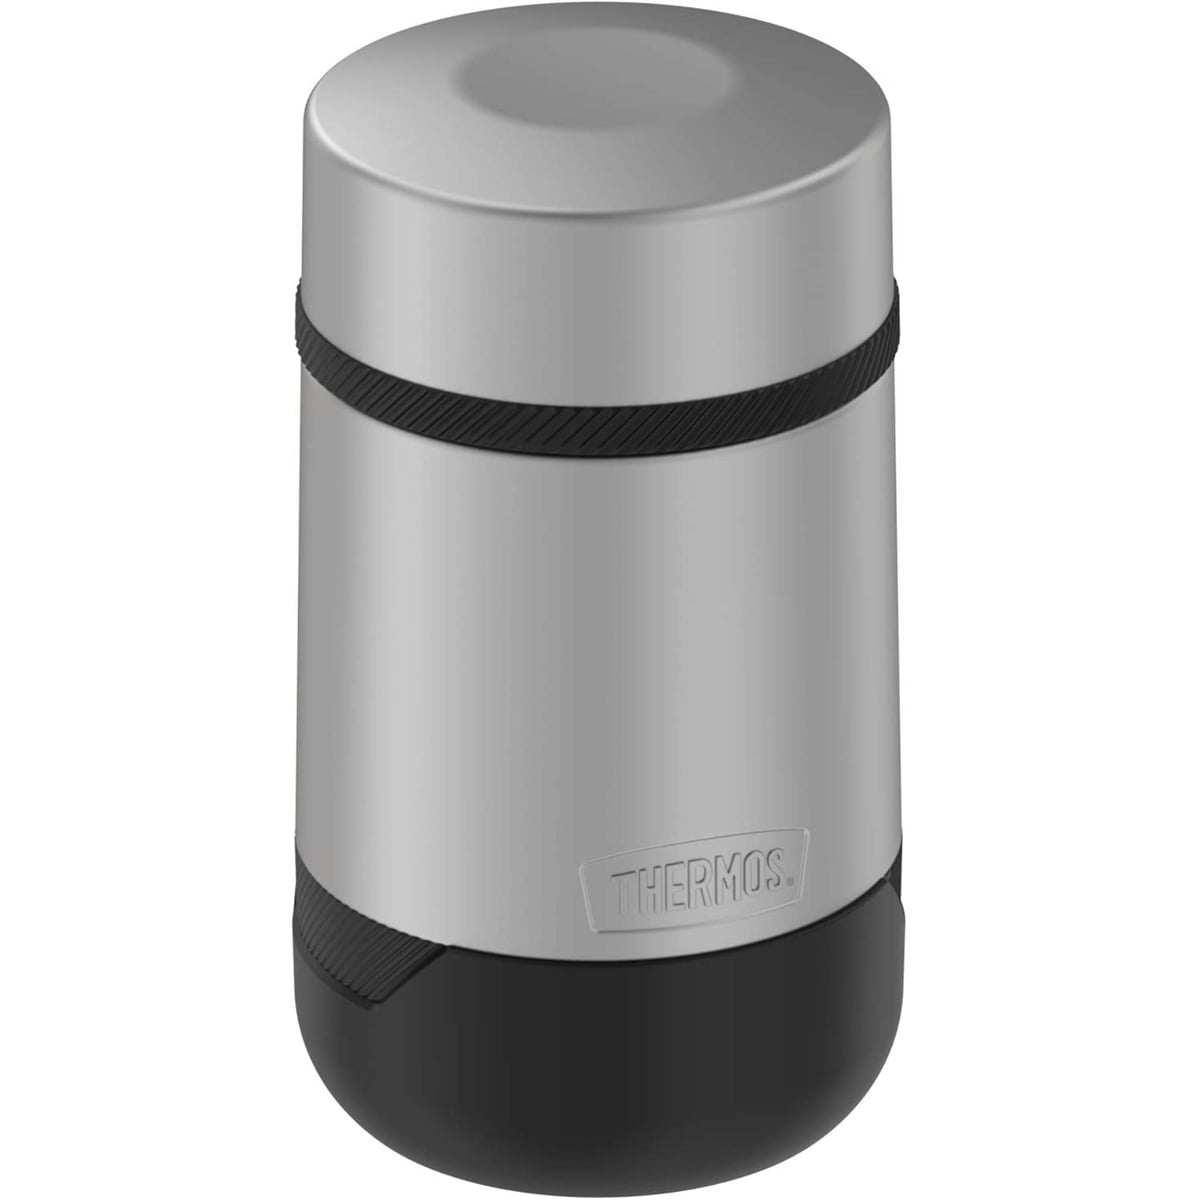  Food thermos with folding spoon and cup 710 ml metallic  grey - Stainless steel vacuum insulated thermos - THERMOS - 40.08 € -  outdoorové oblečení a vybavení shop